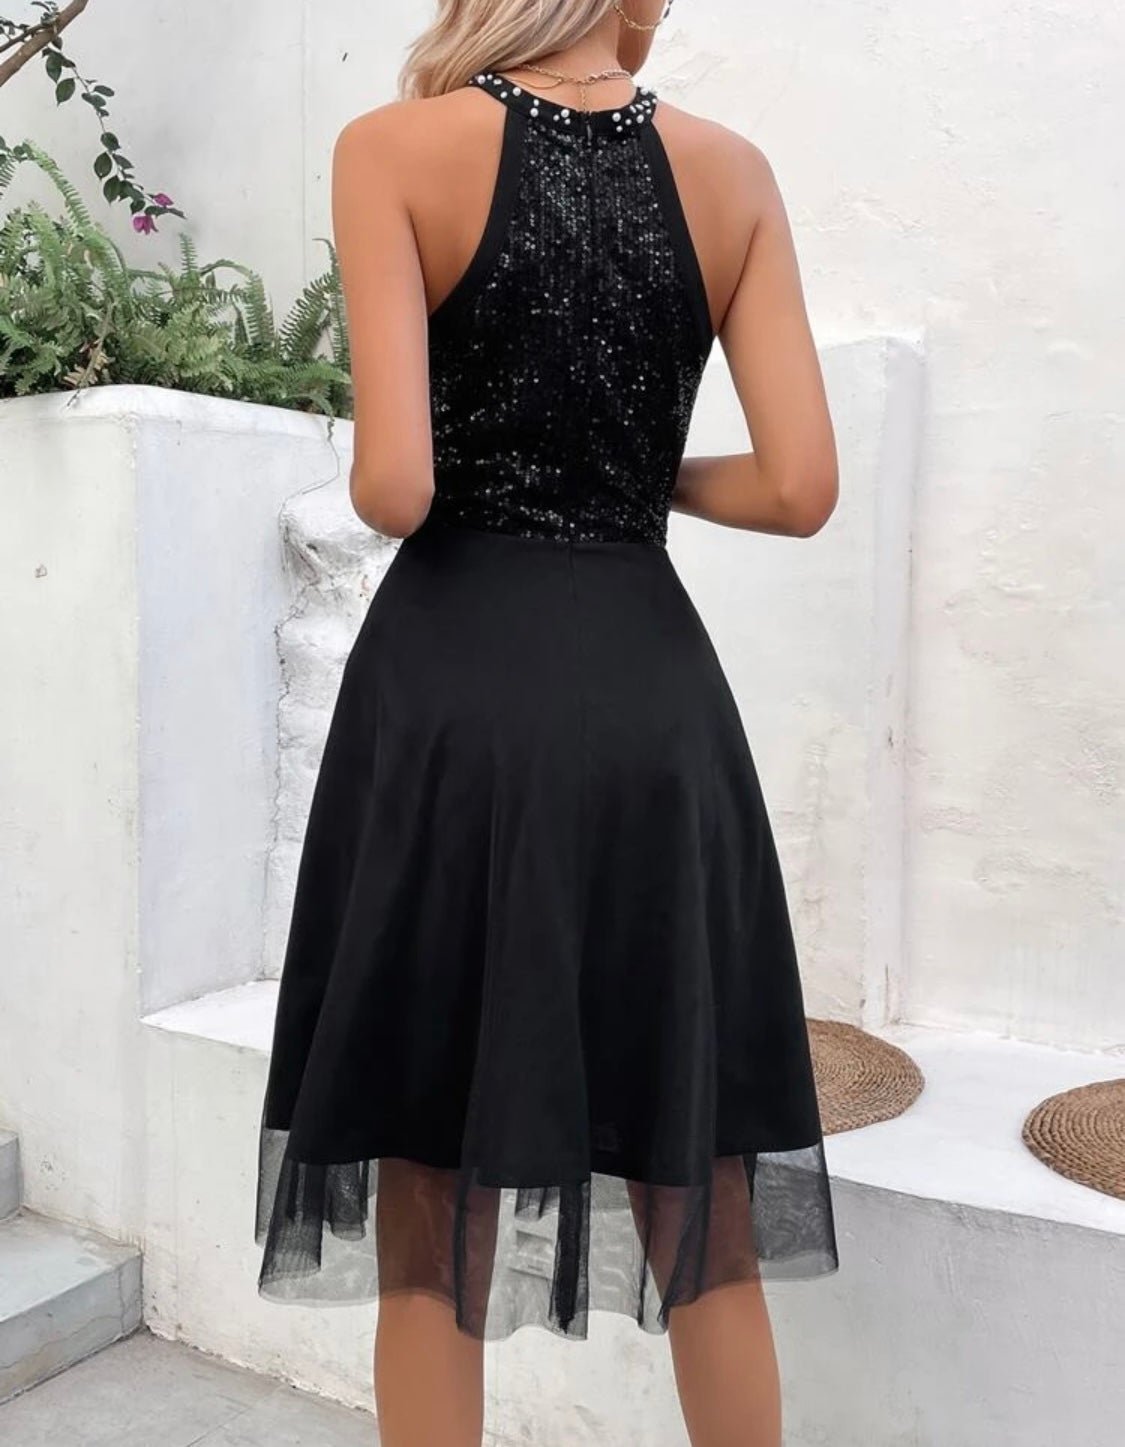 Affordable New - Women’s / Teen Black Sequin, Rhinestone and Pearl Halter Dress / Clothing gcXSLWEqs just for you